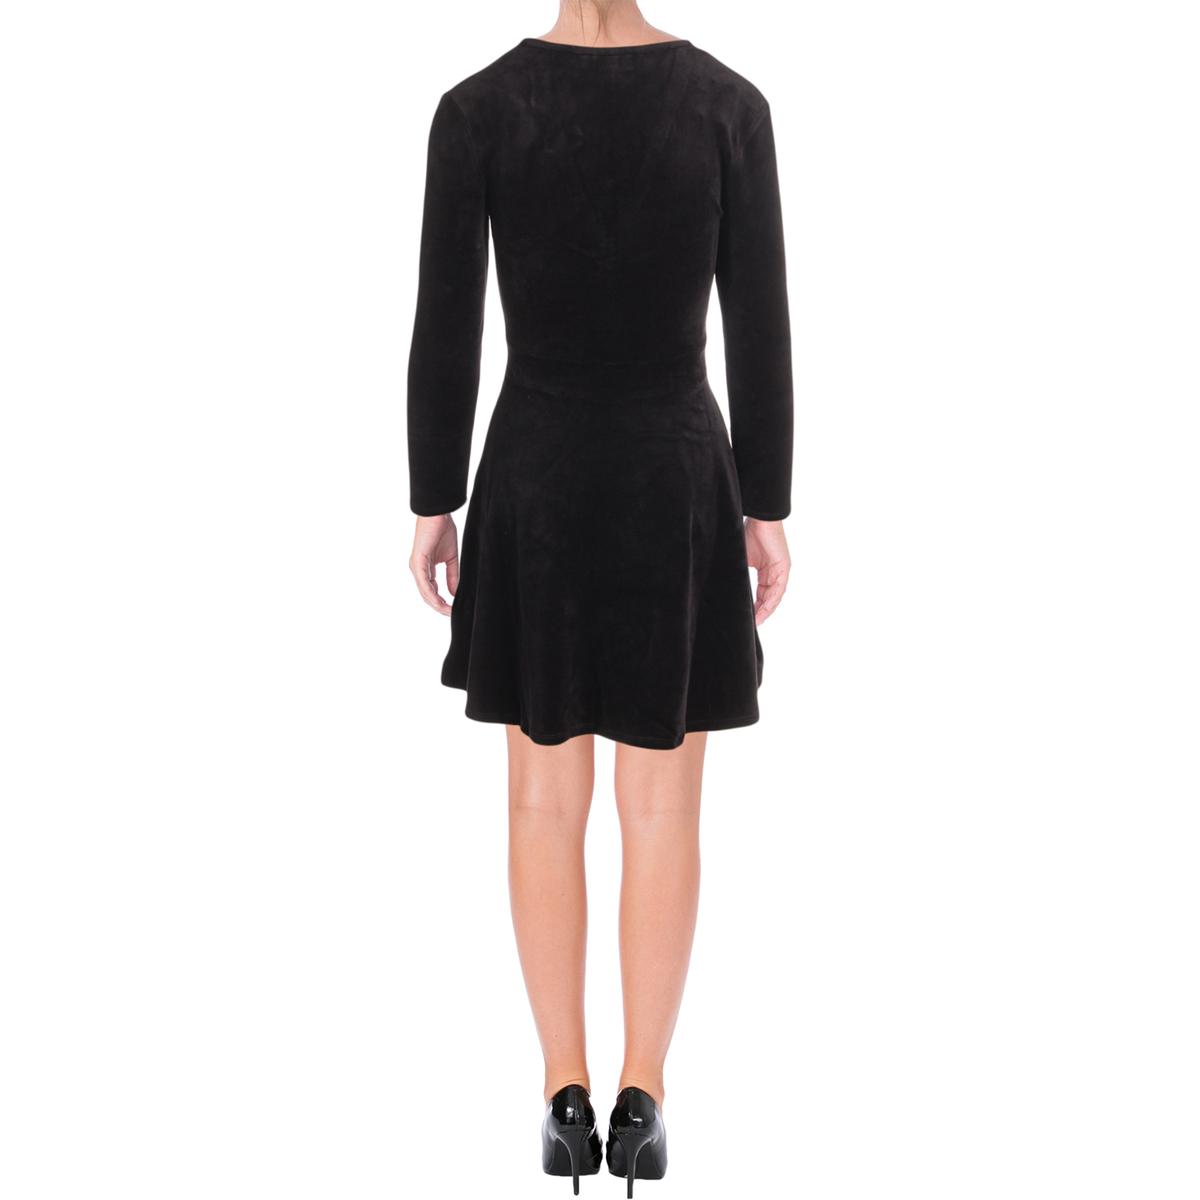 Juicy Couture Black Label Womens Velour Mini 3/4 Sleeves Party Dress ...